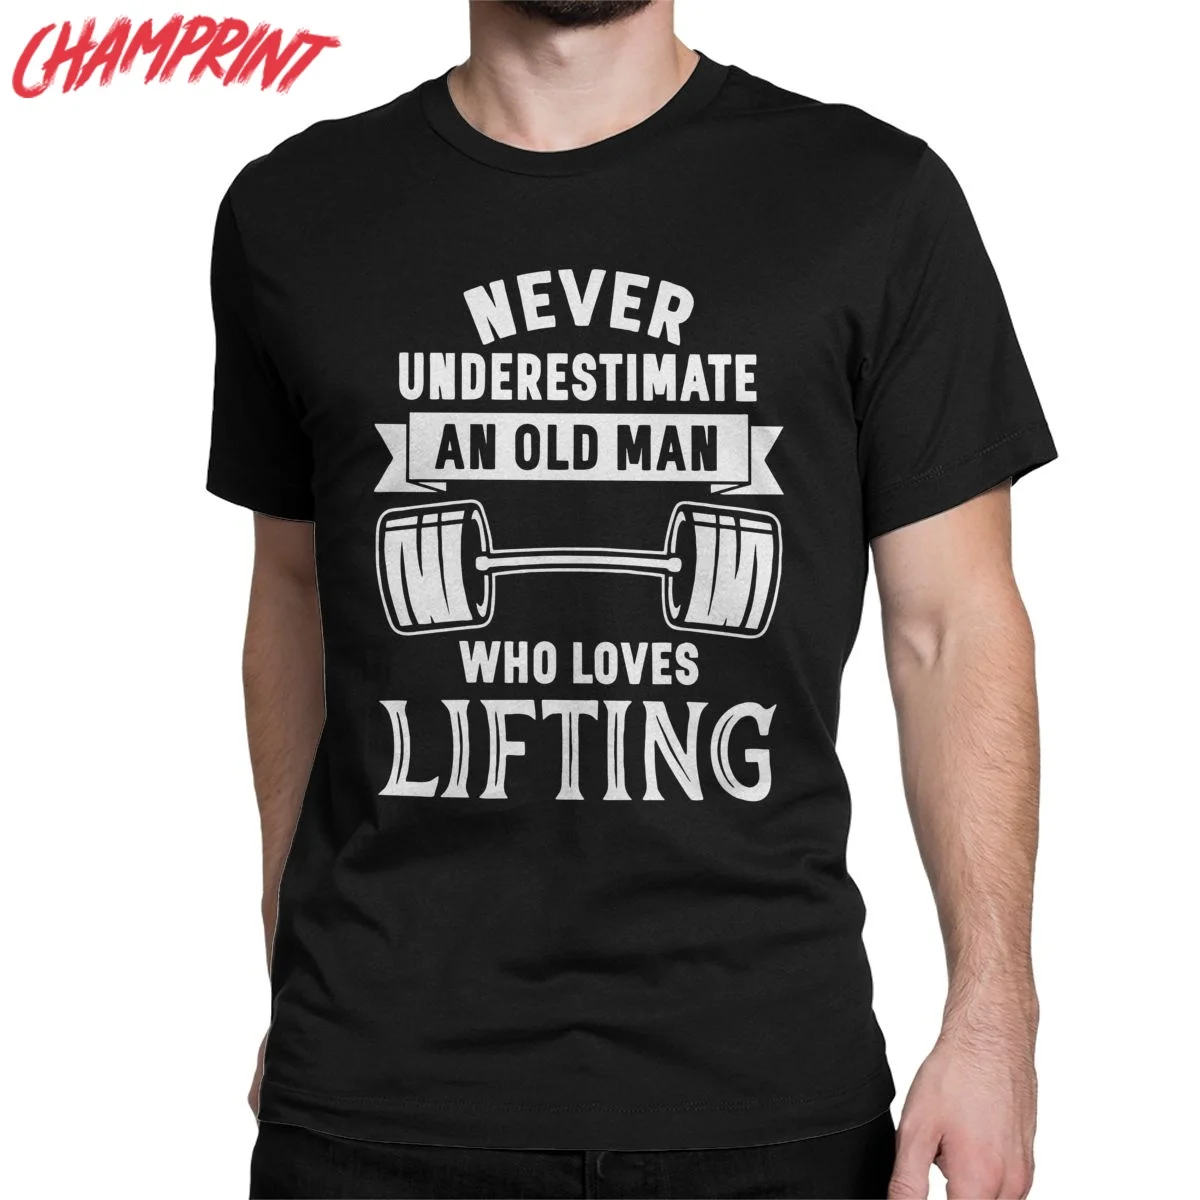 

Old Man Weightlifter Weightlifting Men's T Shirts Awesome Tee Shirt Short Sleeve O Neck T-Shirts Pure Cotton Gift Idea Clothes